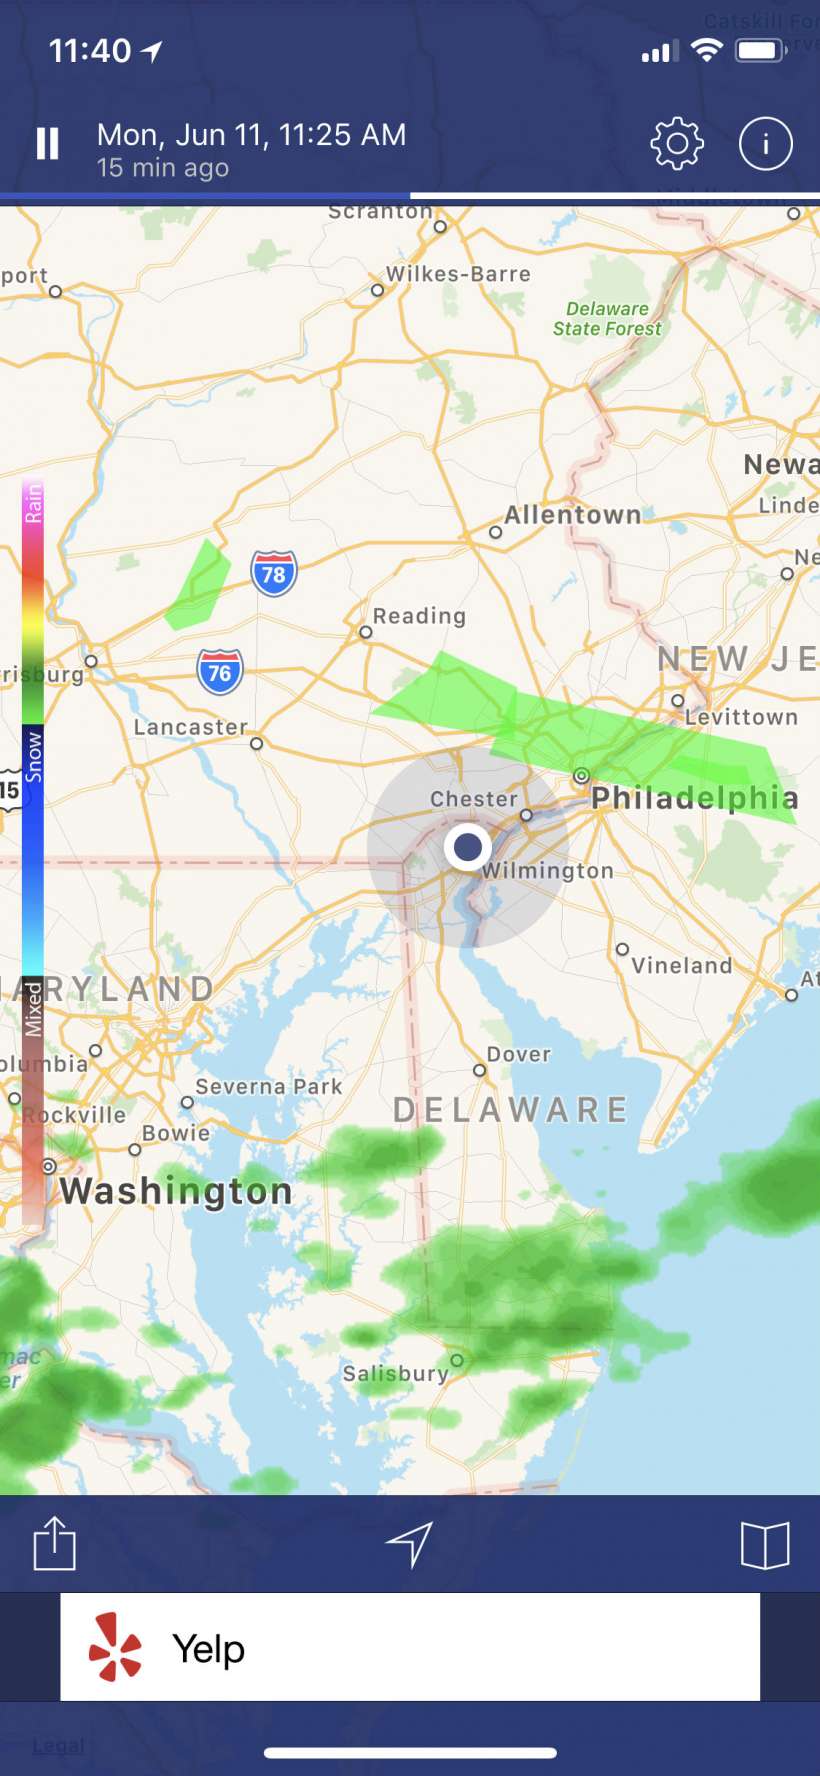 the best weather radar app for iphone